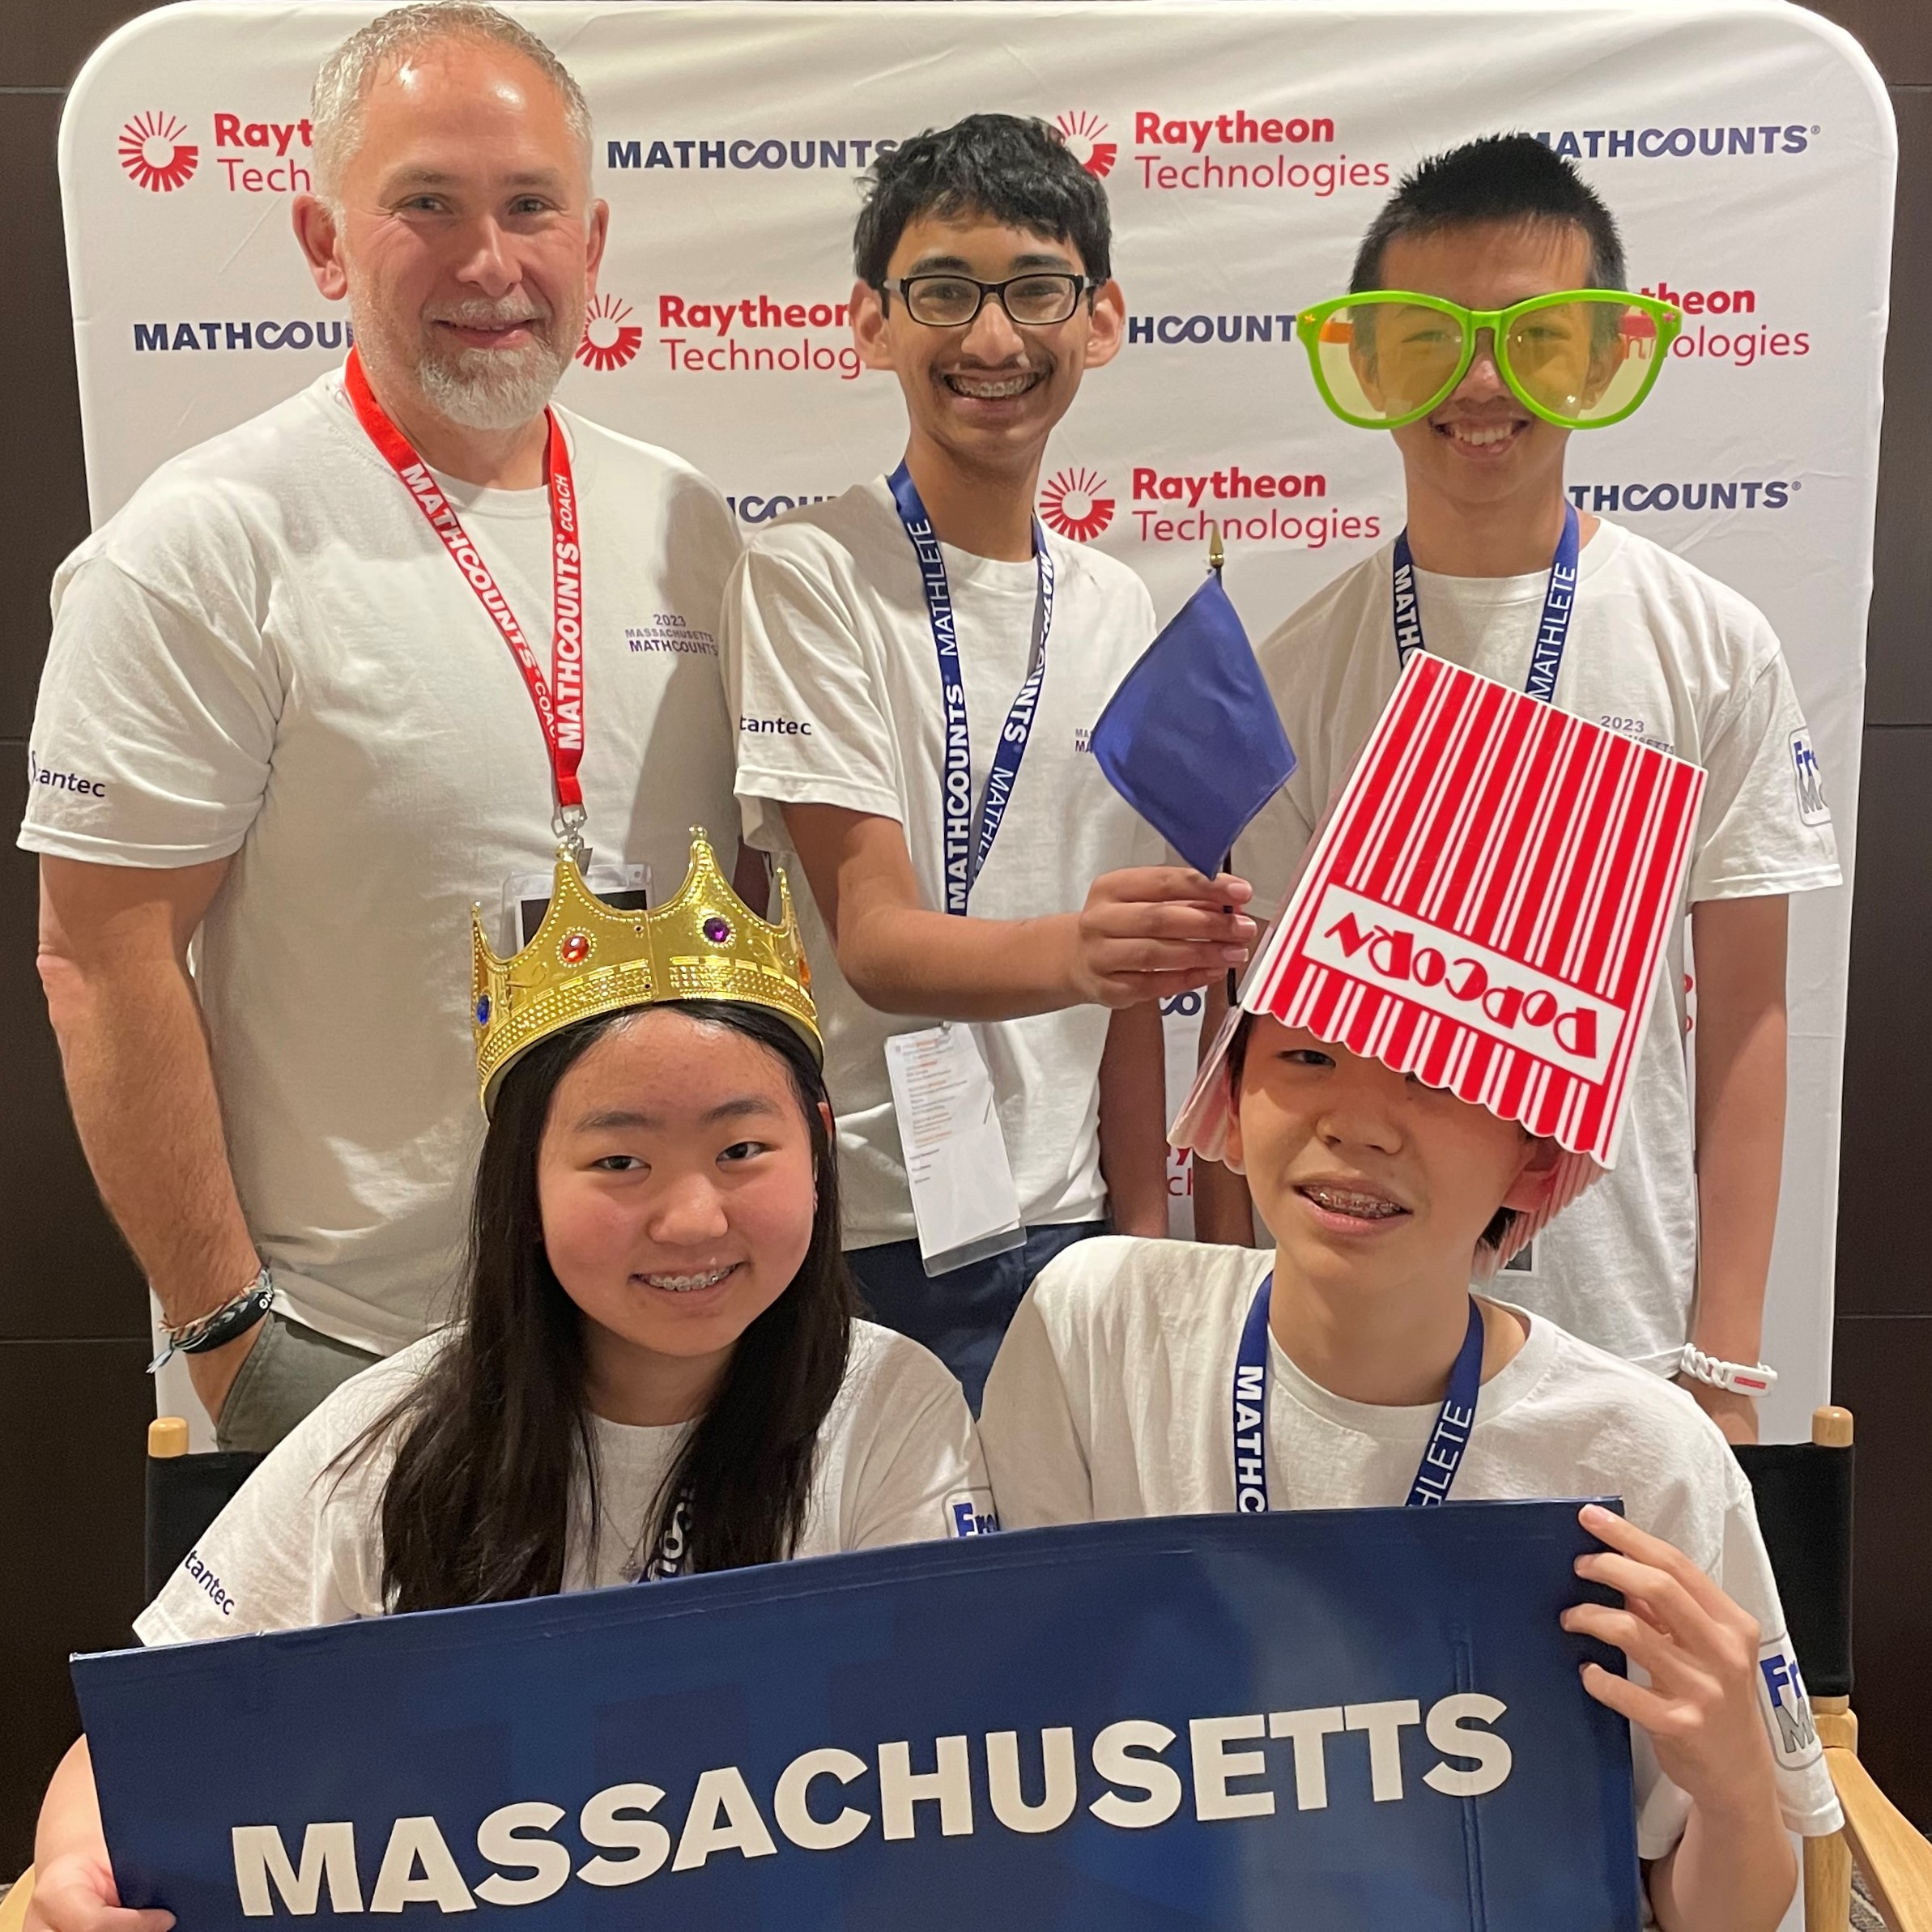 Massachusetts team (1 girl, 3 boys, and coach) smile with props and state team in front of photobooth backdrop.